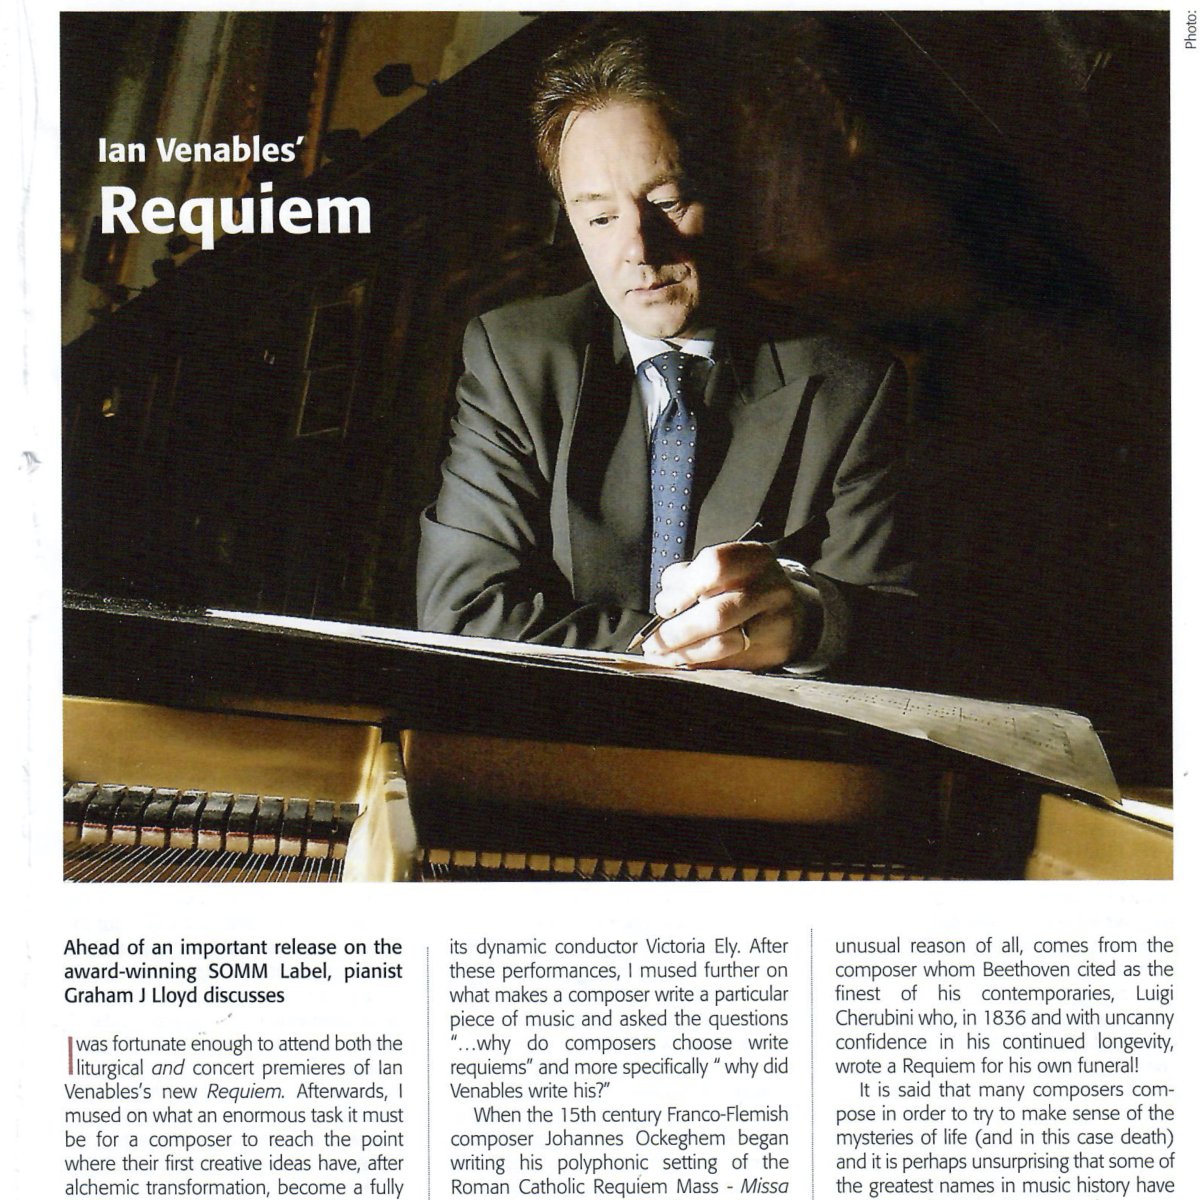 Don't miss the July-September issue of #MusicalOpinion as Graham Lloyd has an absorbing, inspiring, and enlightening feature on @ComposerIan's Requiem!